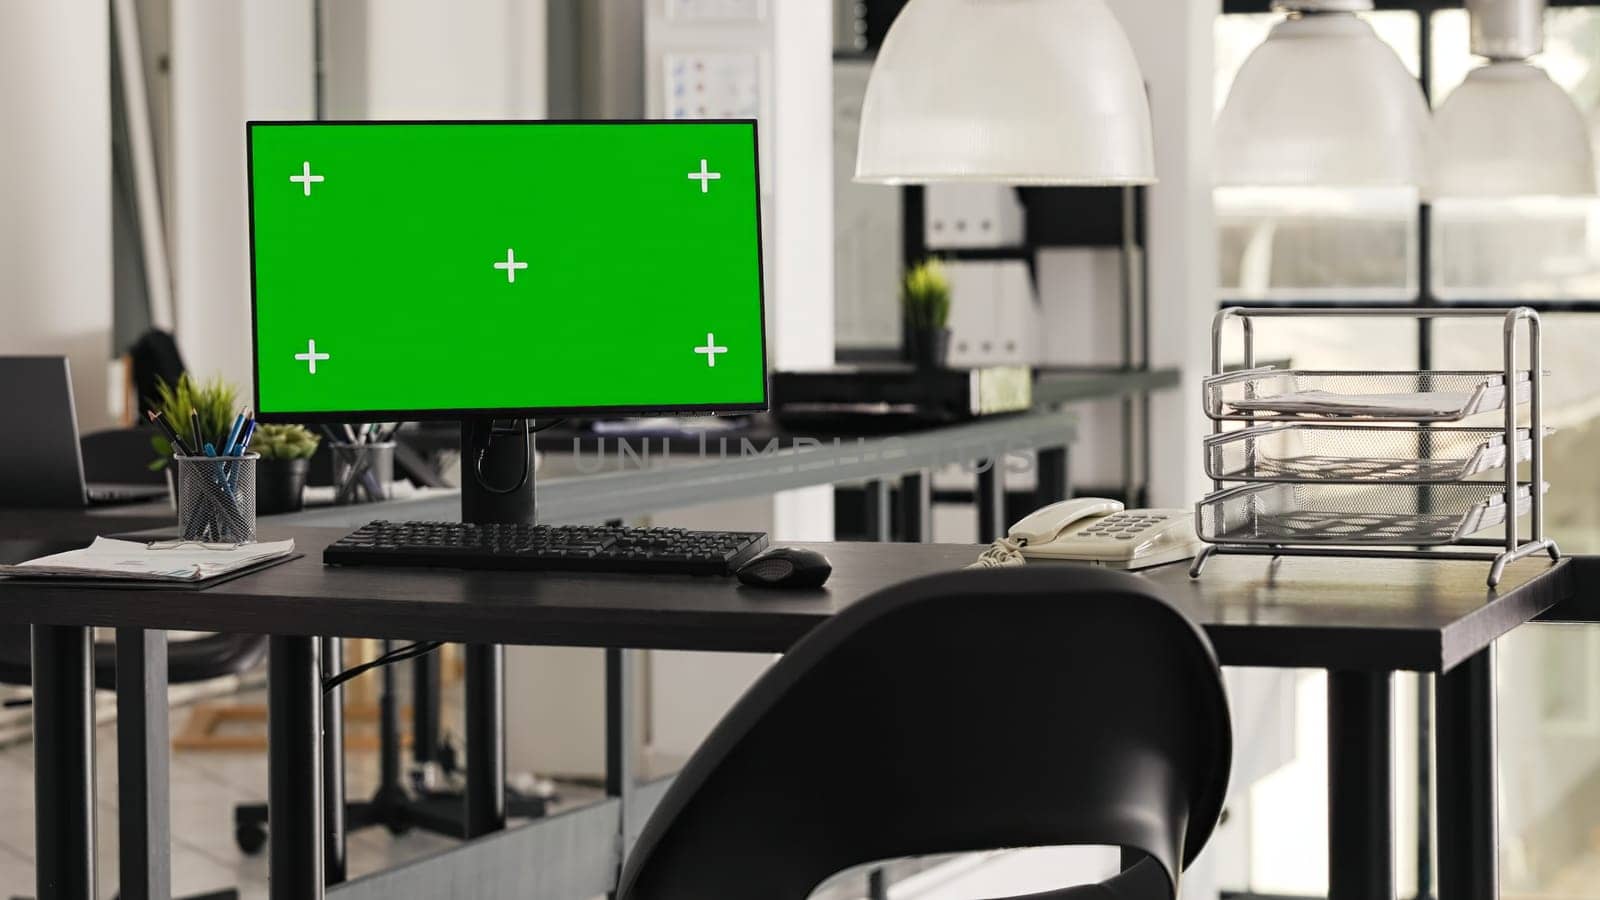 Greenscreen display placed on office desk used for business operations in startup space, empty workstation with monitor running isolated mockup copyspace. Desktop showing blank chromakey display.